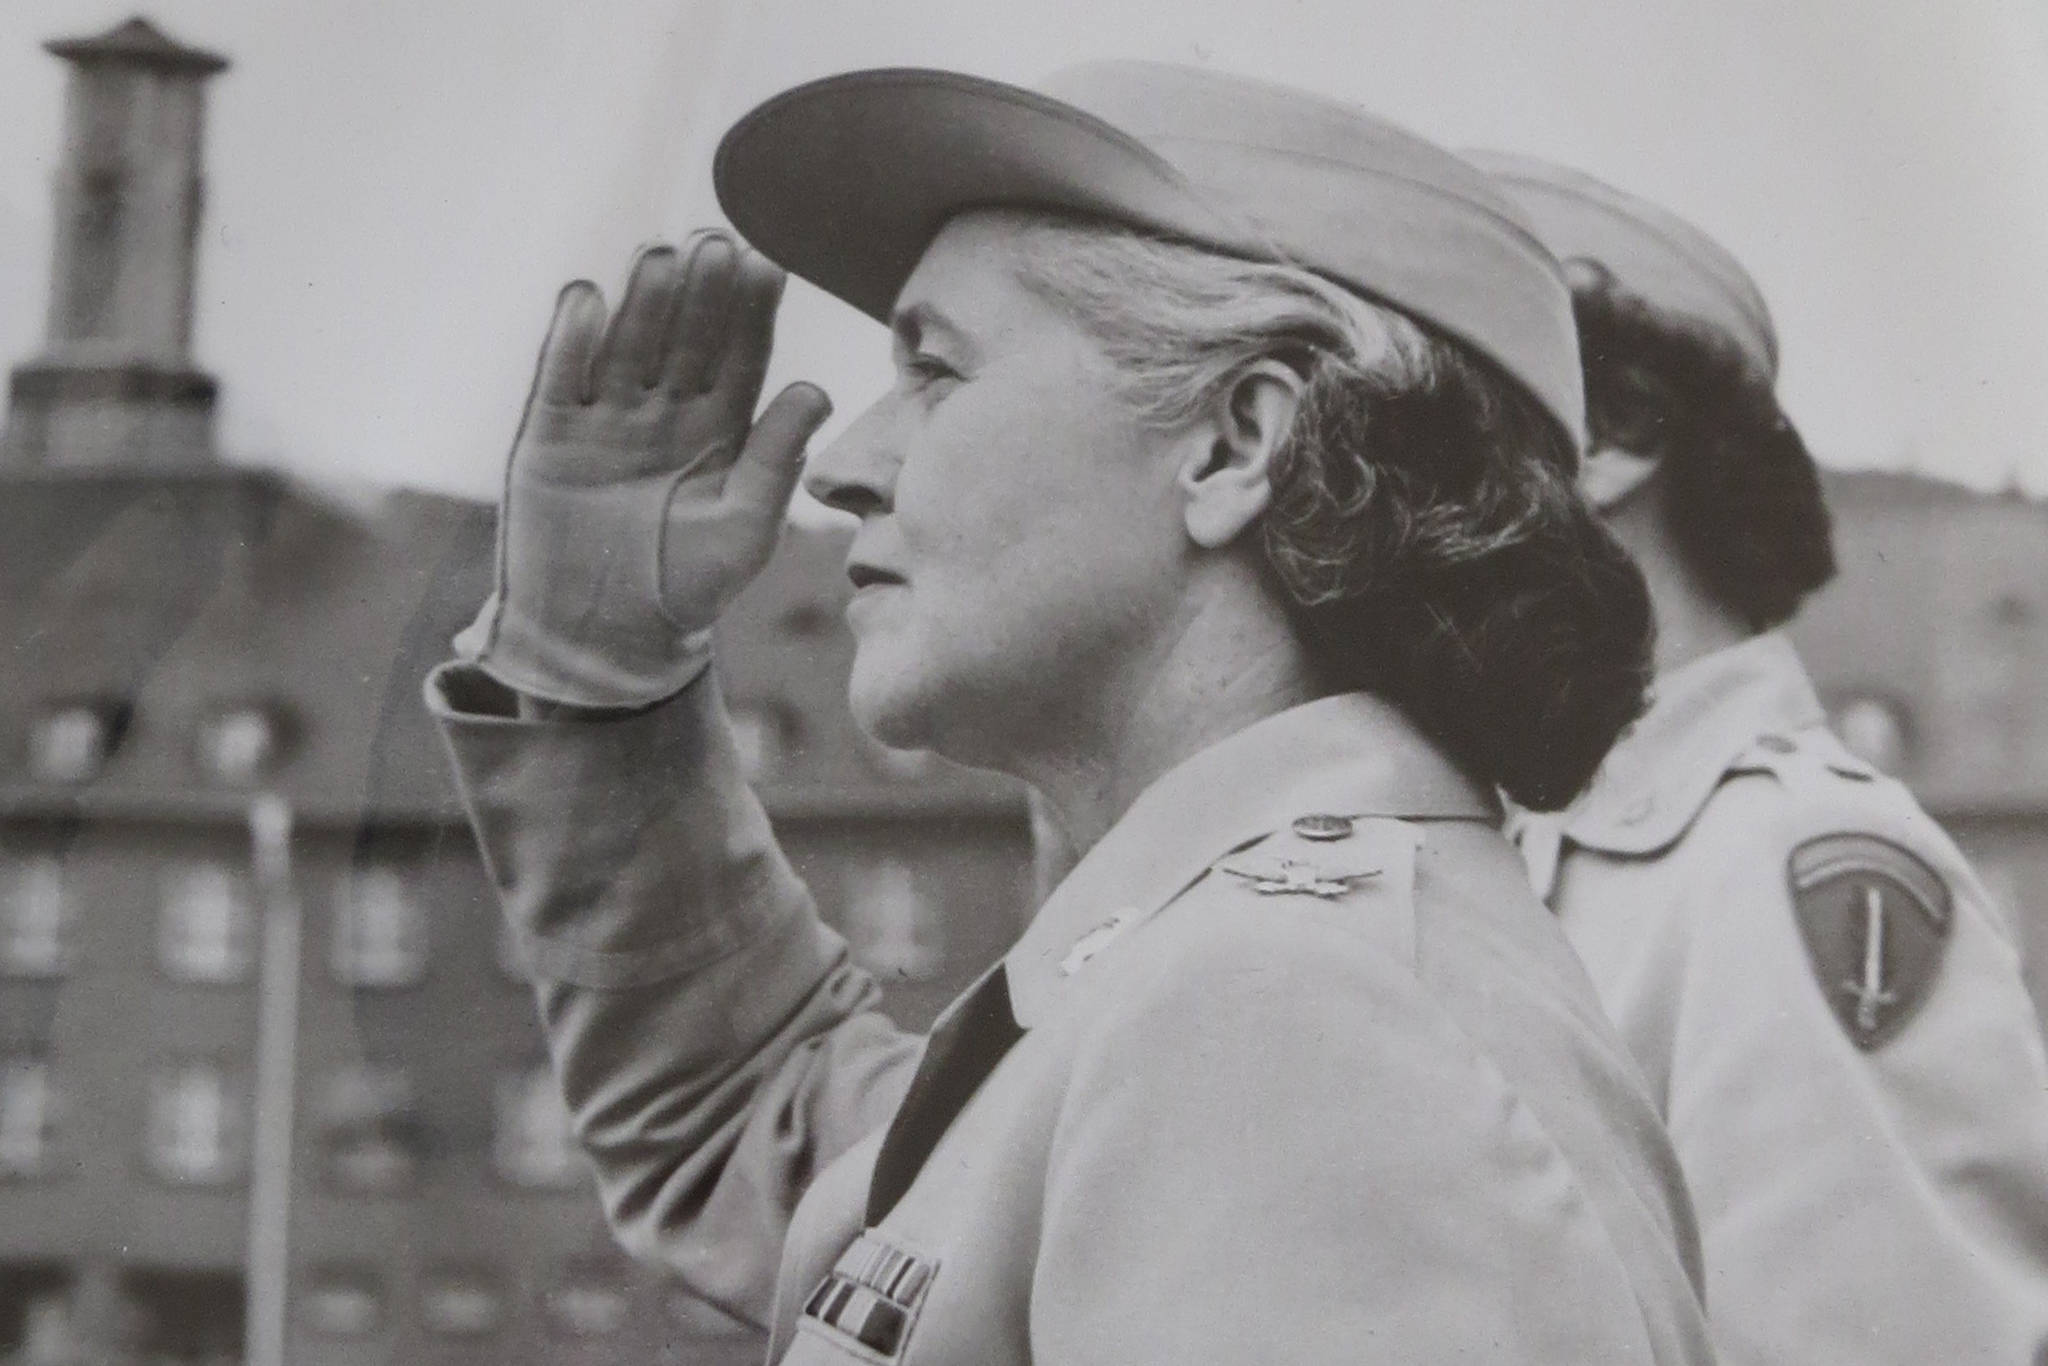 Col. Mary Louise Milligan Rasmuson was the 5th commander of the Women’s Army Corps and oversaw the integration of the service. On Nov. 9, 2020, Operation Mary Louise, named in her honor, was stood up to enhance visibility and access to services for women veterans in Alaska. (Courtesy Photo / Rasmuson Foundation)